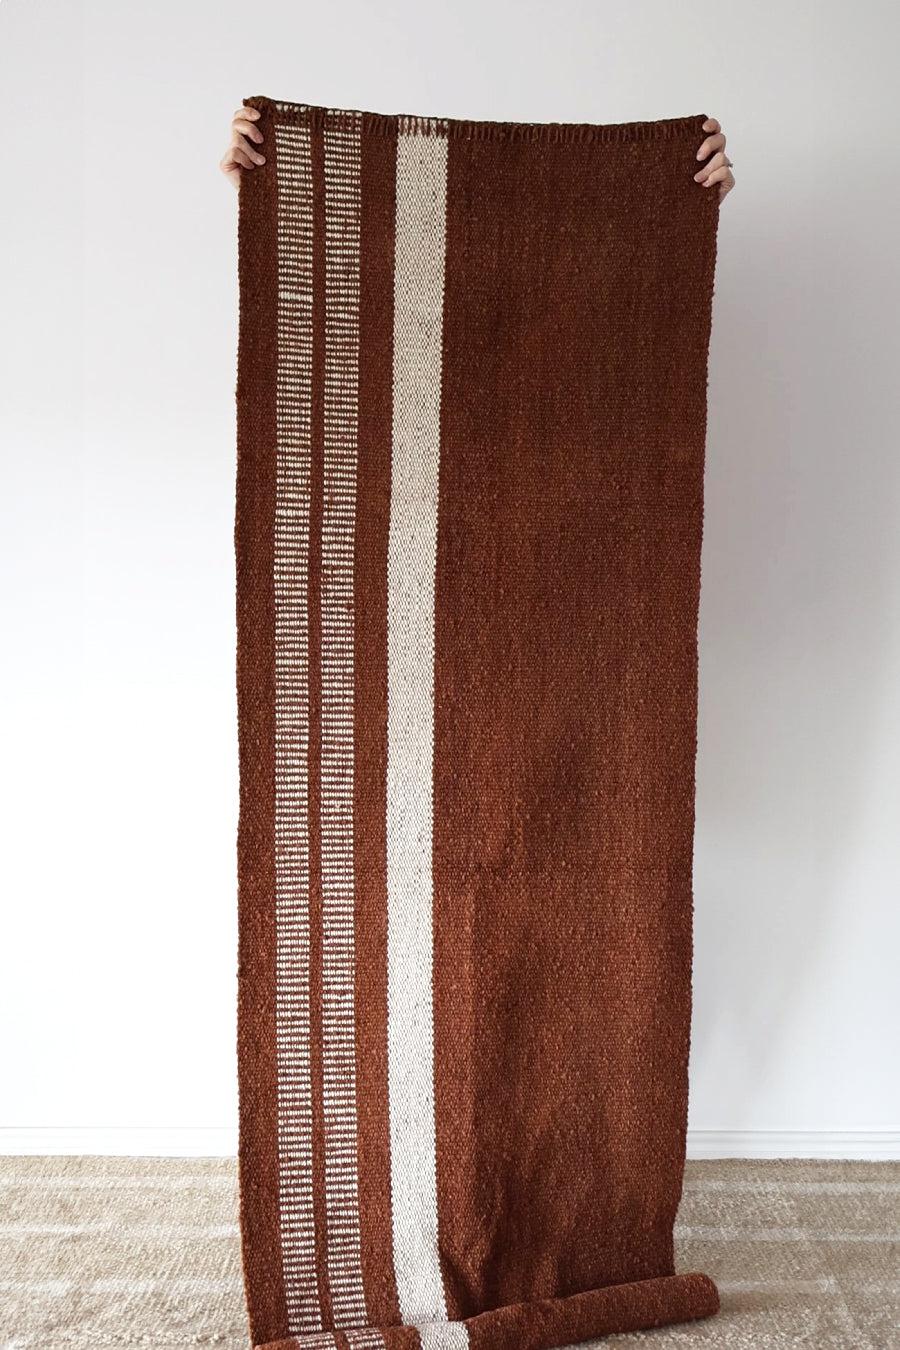 PLENA RUG | RUNNER #10 RUST & NATURAL-The Andes Project